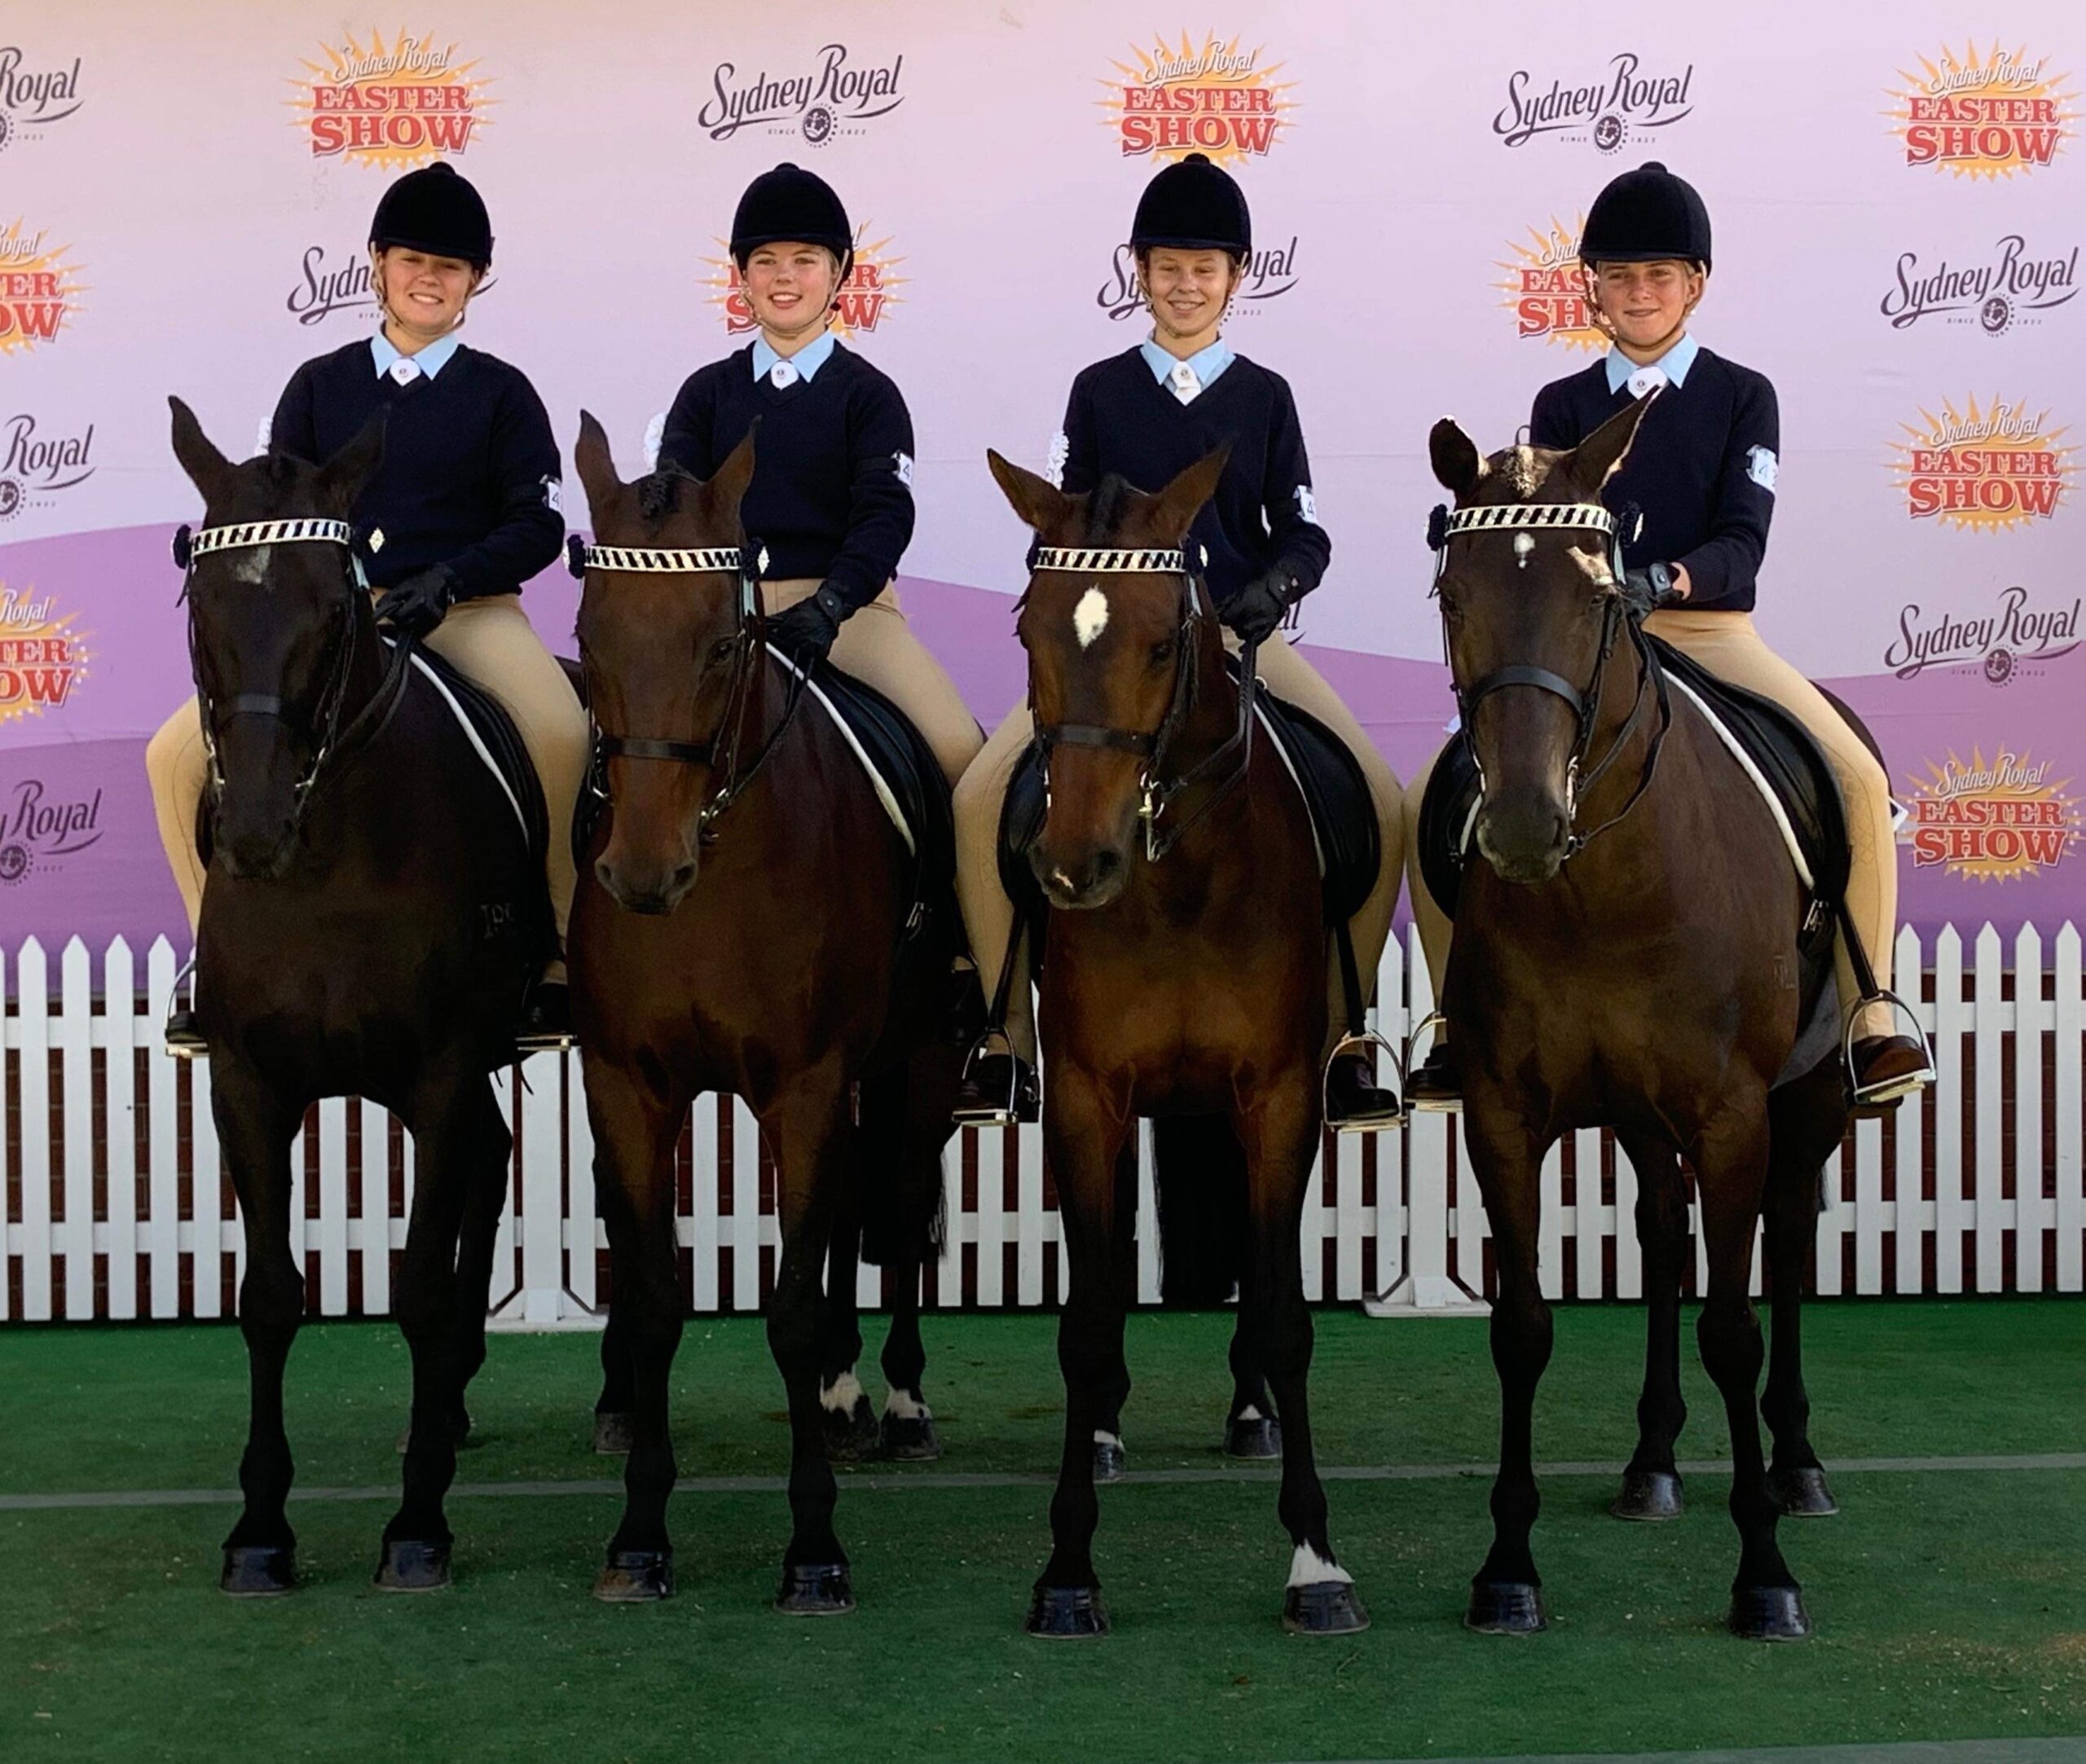 Wee Waa Pony Club members excel at the 2021 Sydney Royal Easter Show